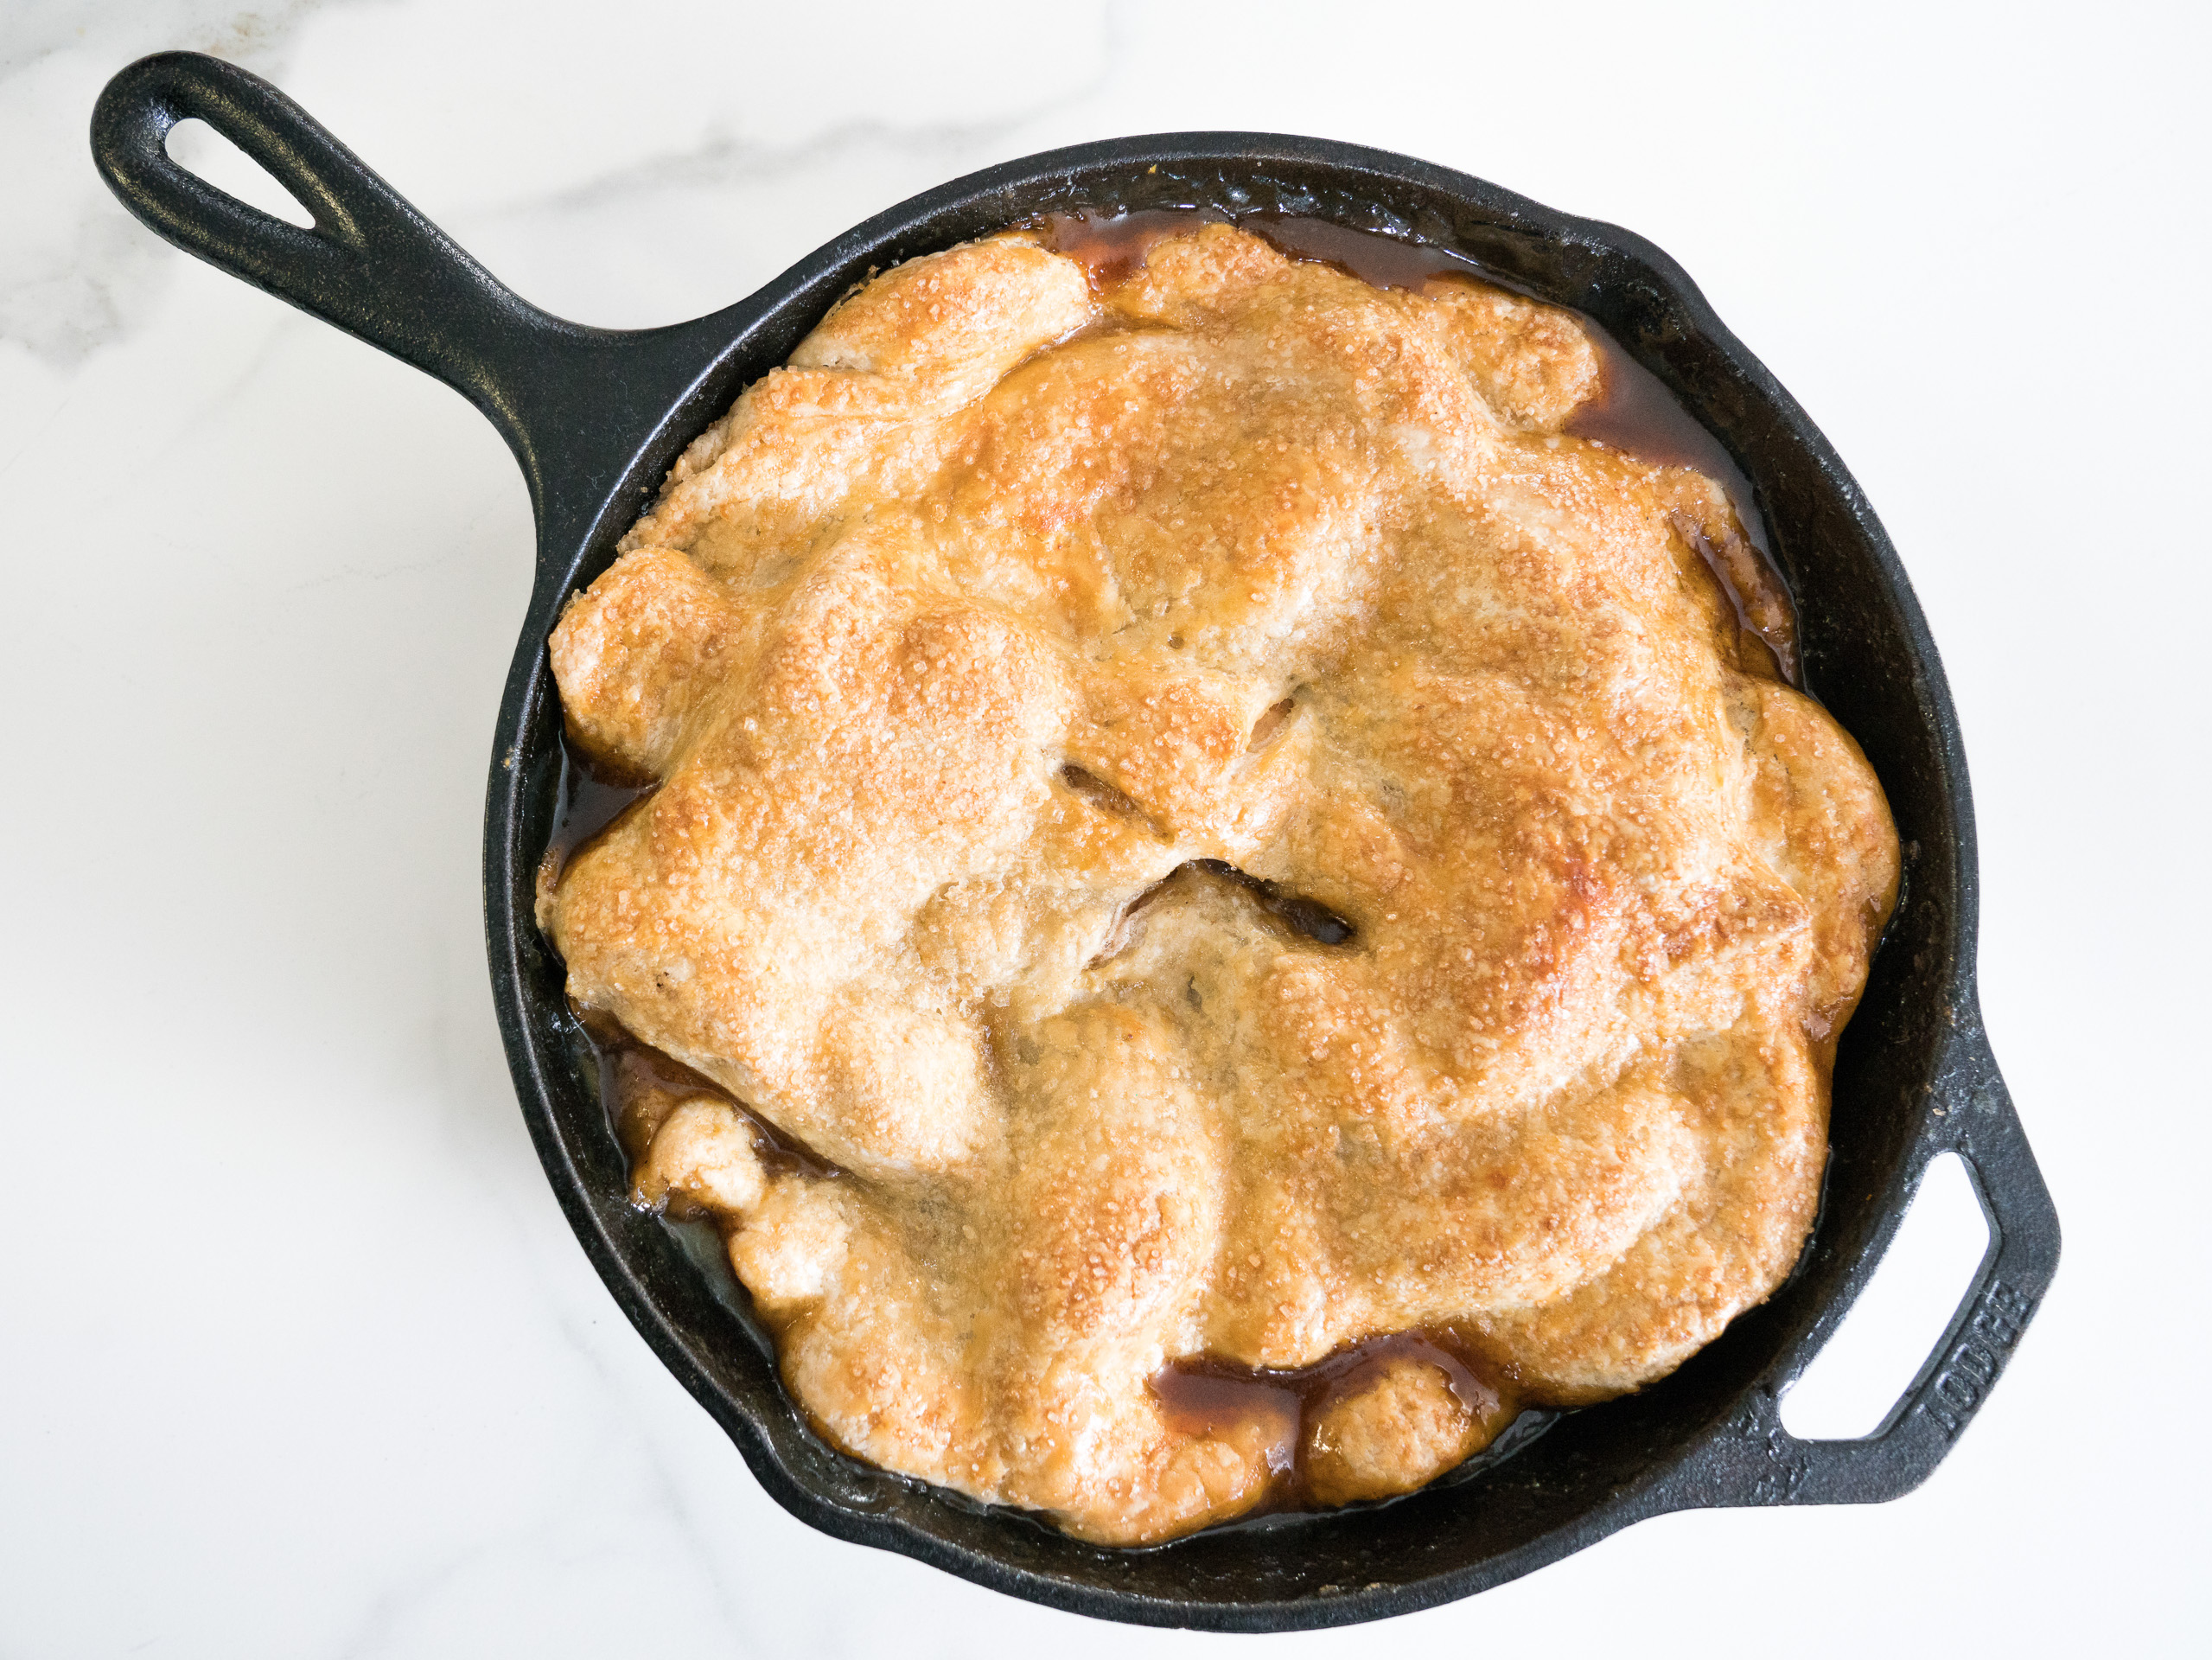 https://www.foodnetwork.com/content/dam/images/food/fullset/2017/12/28/0/YW1108_Peach-and-Brown-Butter-Skillet-Pie_s4x3.jpg